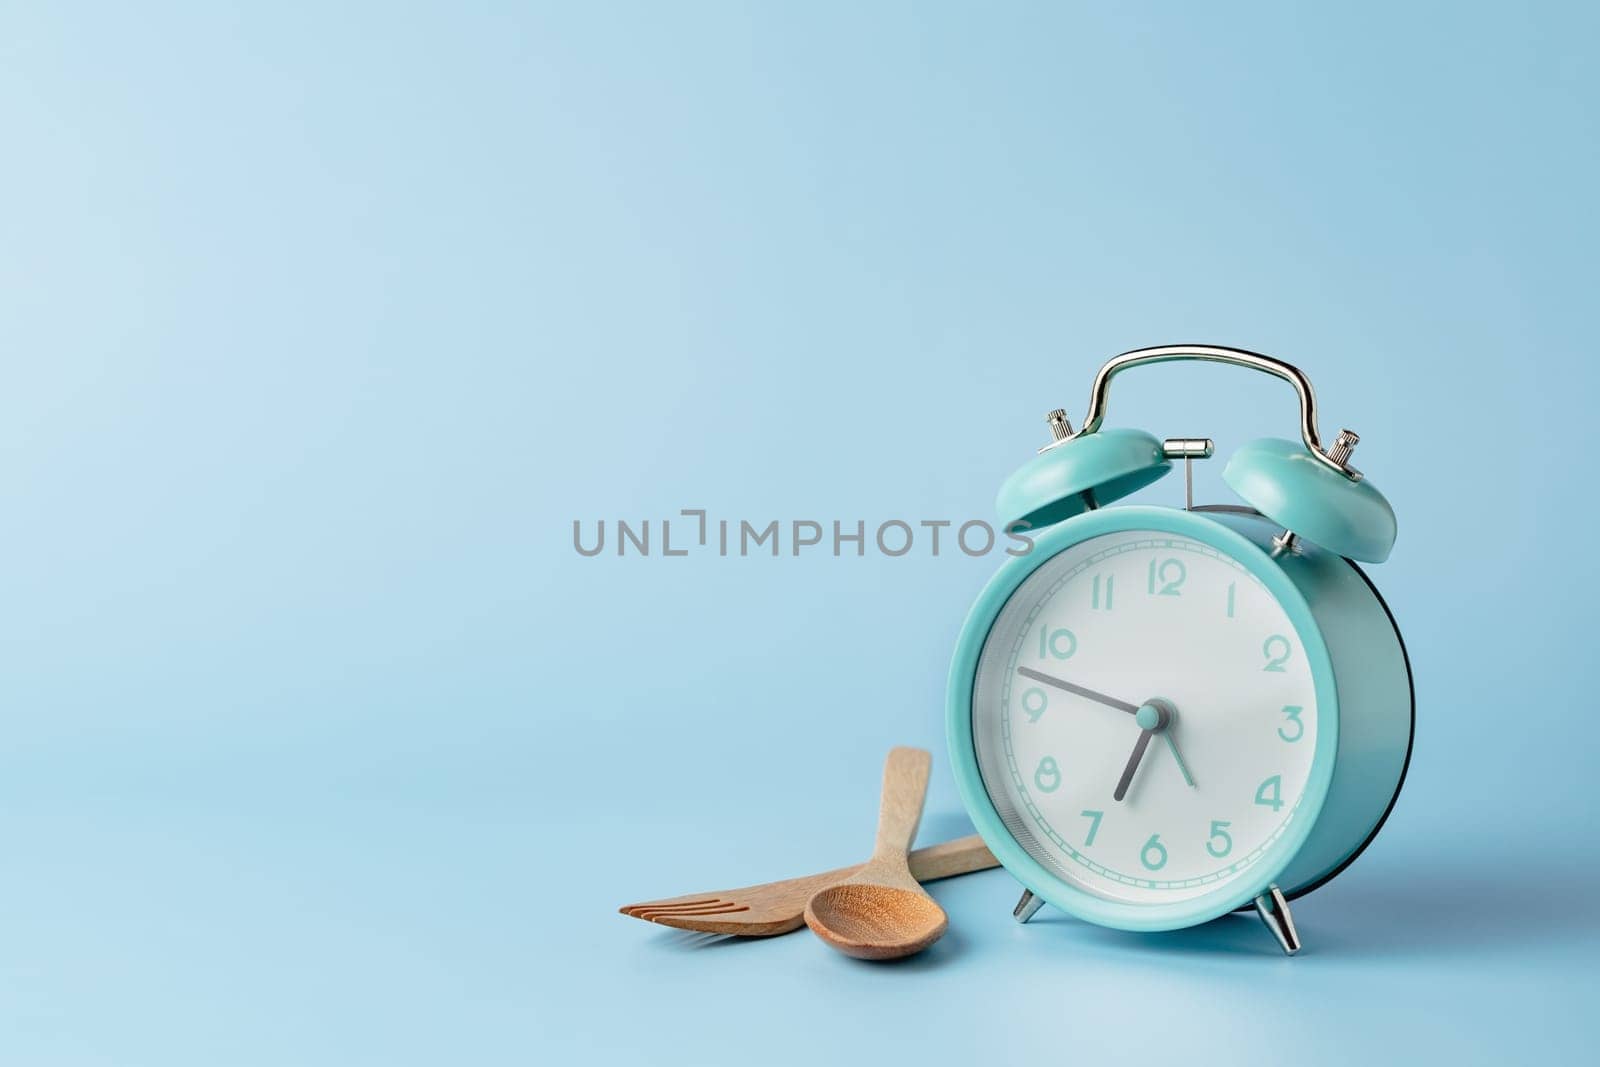 An alarm clock with cutlery set against blue background for the concept of food, time management, losing weight and eating on time.